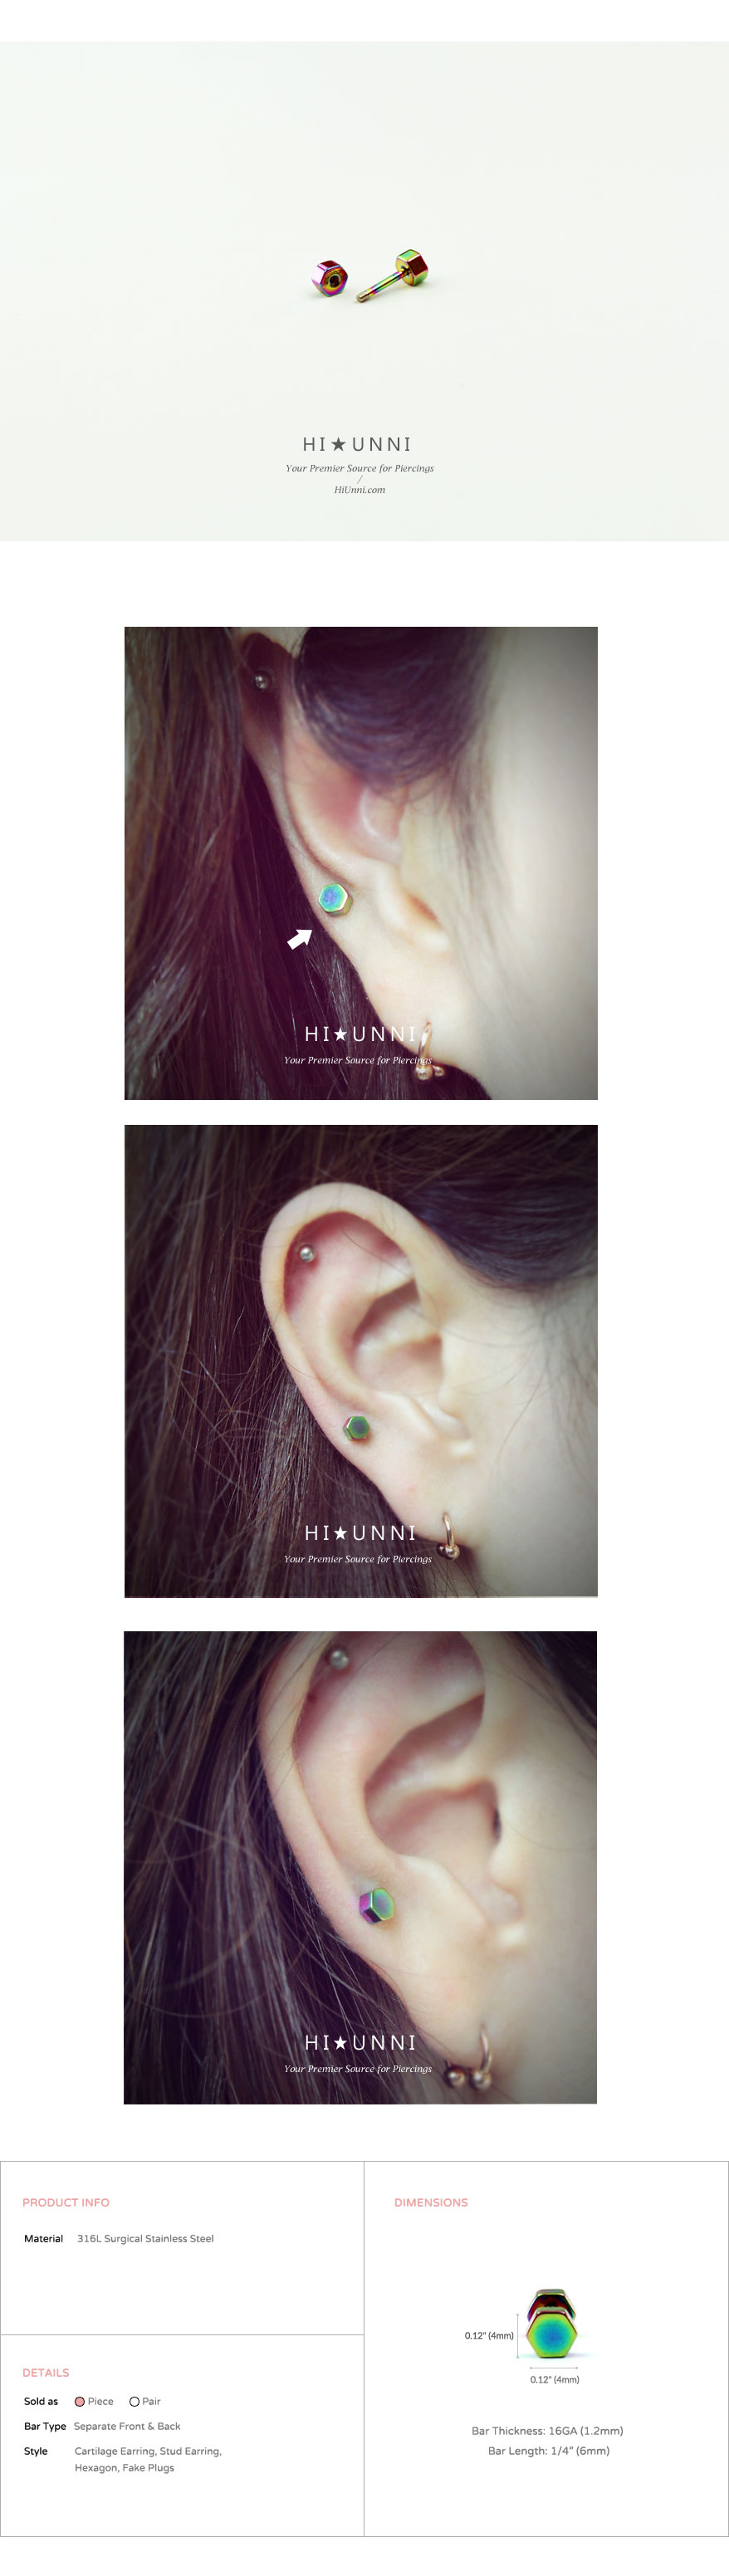 ear_studs_piercing_Cartilage_earrings_16g_316l_Surgical_Stainless_Steel_korean_asian_style_jewelry_fake_plug_Gauge_cheaters_hexagon_rainbow_2